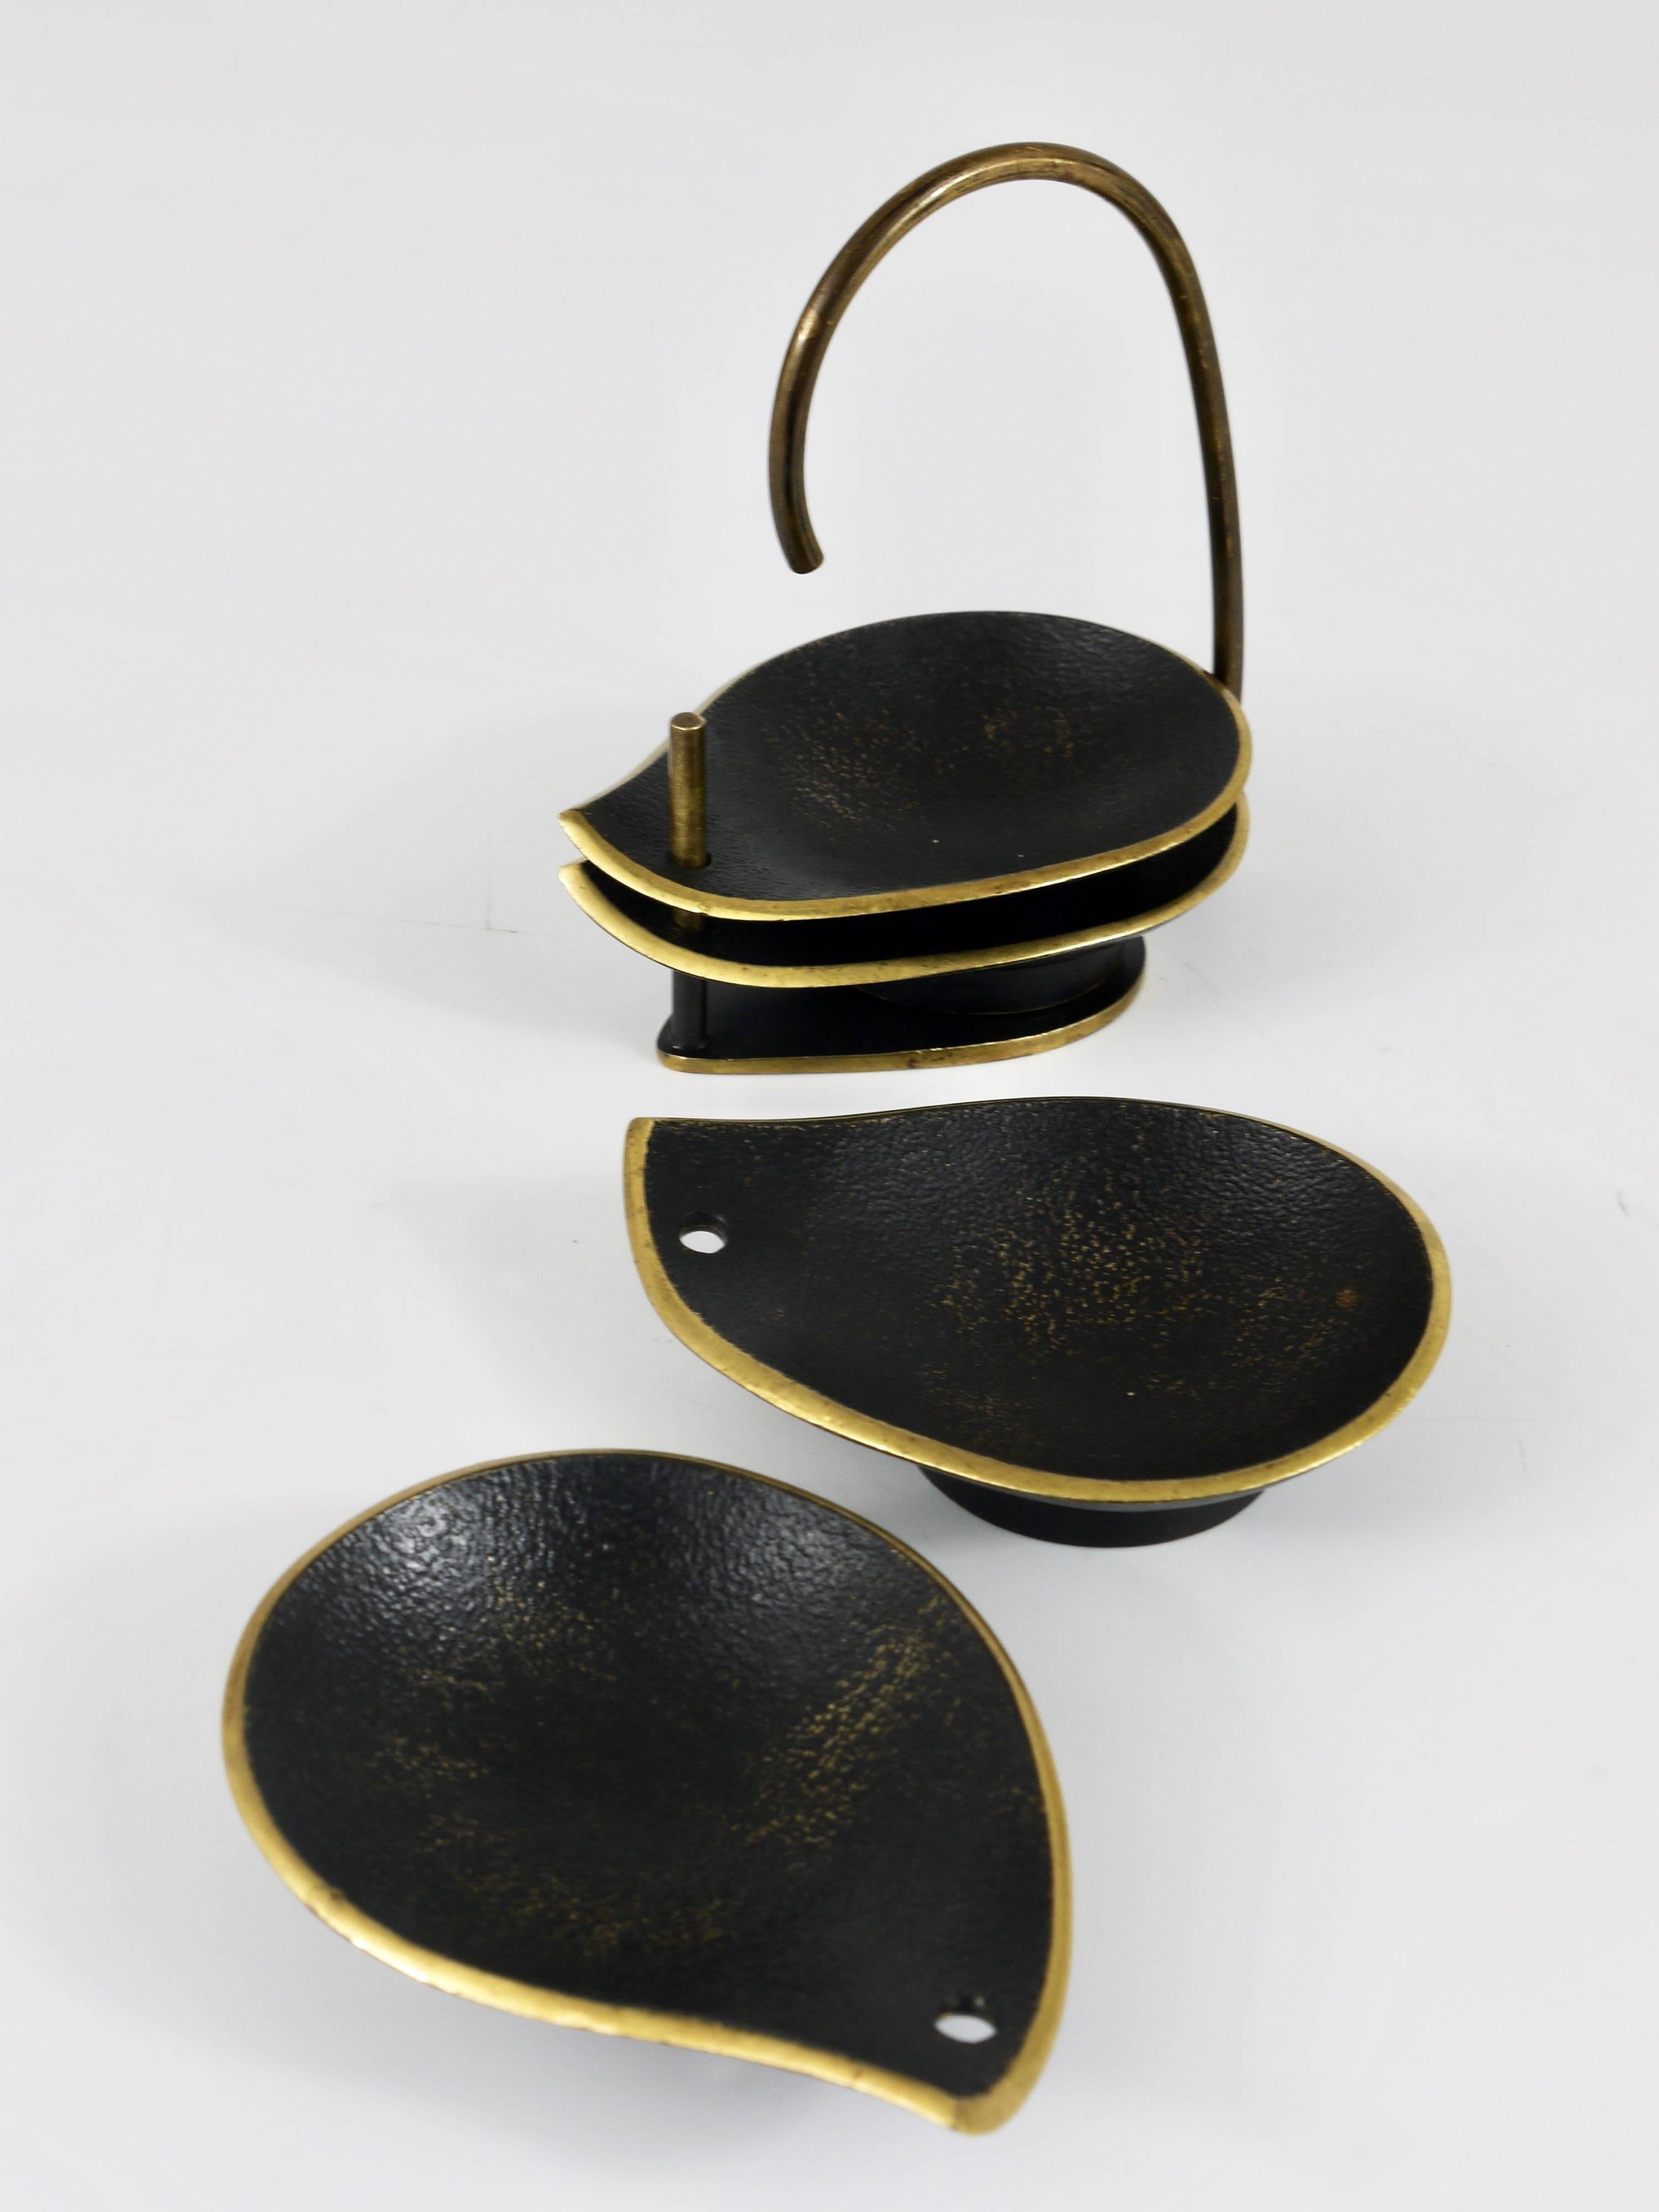 A charming set of four beautiful black-finished modernist brass ashtrays in the shape of drops, with stand from the 1950s. Made in Austria by Richard Rohac. In good condition with nice patina.